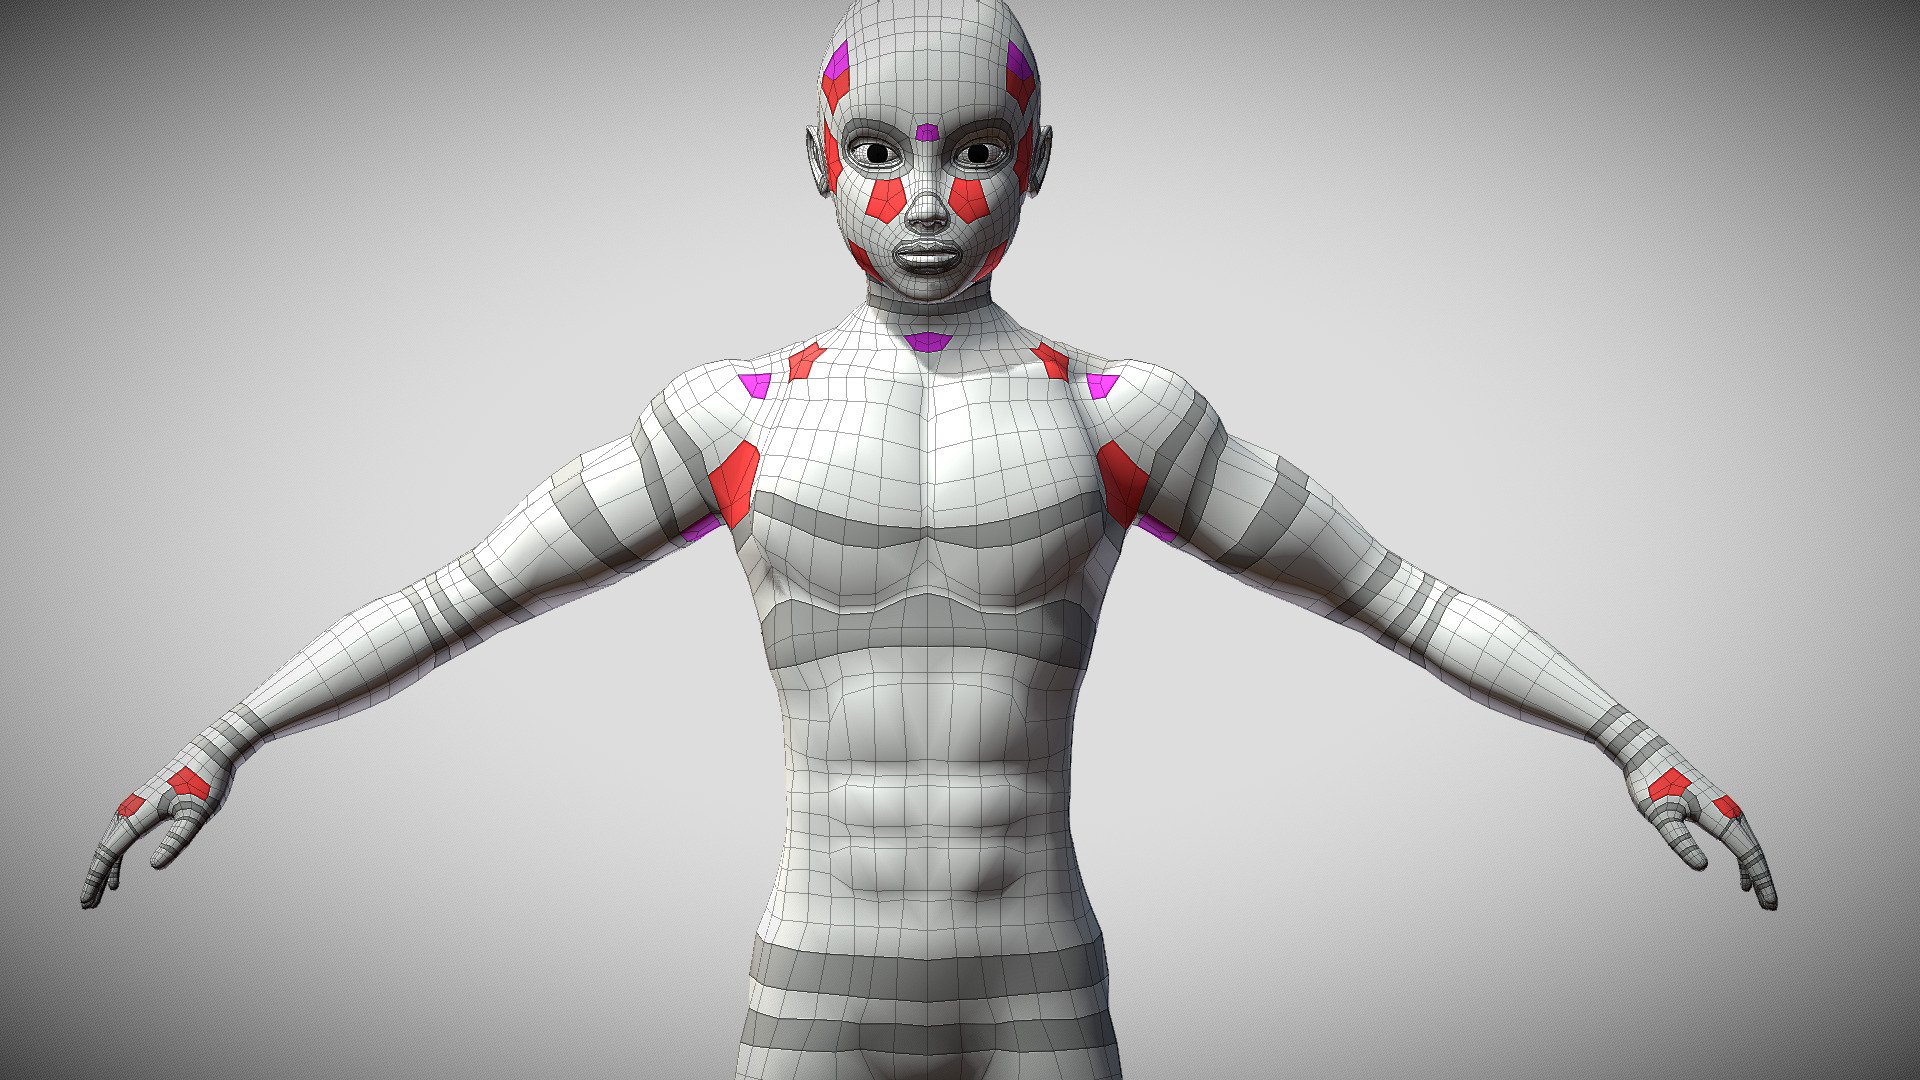 Male Body - Topology.
Grid-based with stars/directions in appropriate places - great for rigging, comfortable to edit/sculpt.

The model contains 3 objects.
Modeled in Blender.

Blend file before modifiers has 8.166 Faces, 16.198 Triangles, 8.133 Vertices.

Video Preview: https://youtu.be/OURtN-INAwE
.
My Gallery: https://edjan3d.wixsite.com/my-site - Male Body - Topology - Buy Royalty Free 3D model by Ed.Jan 3d model